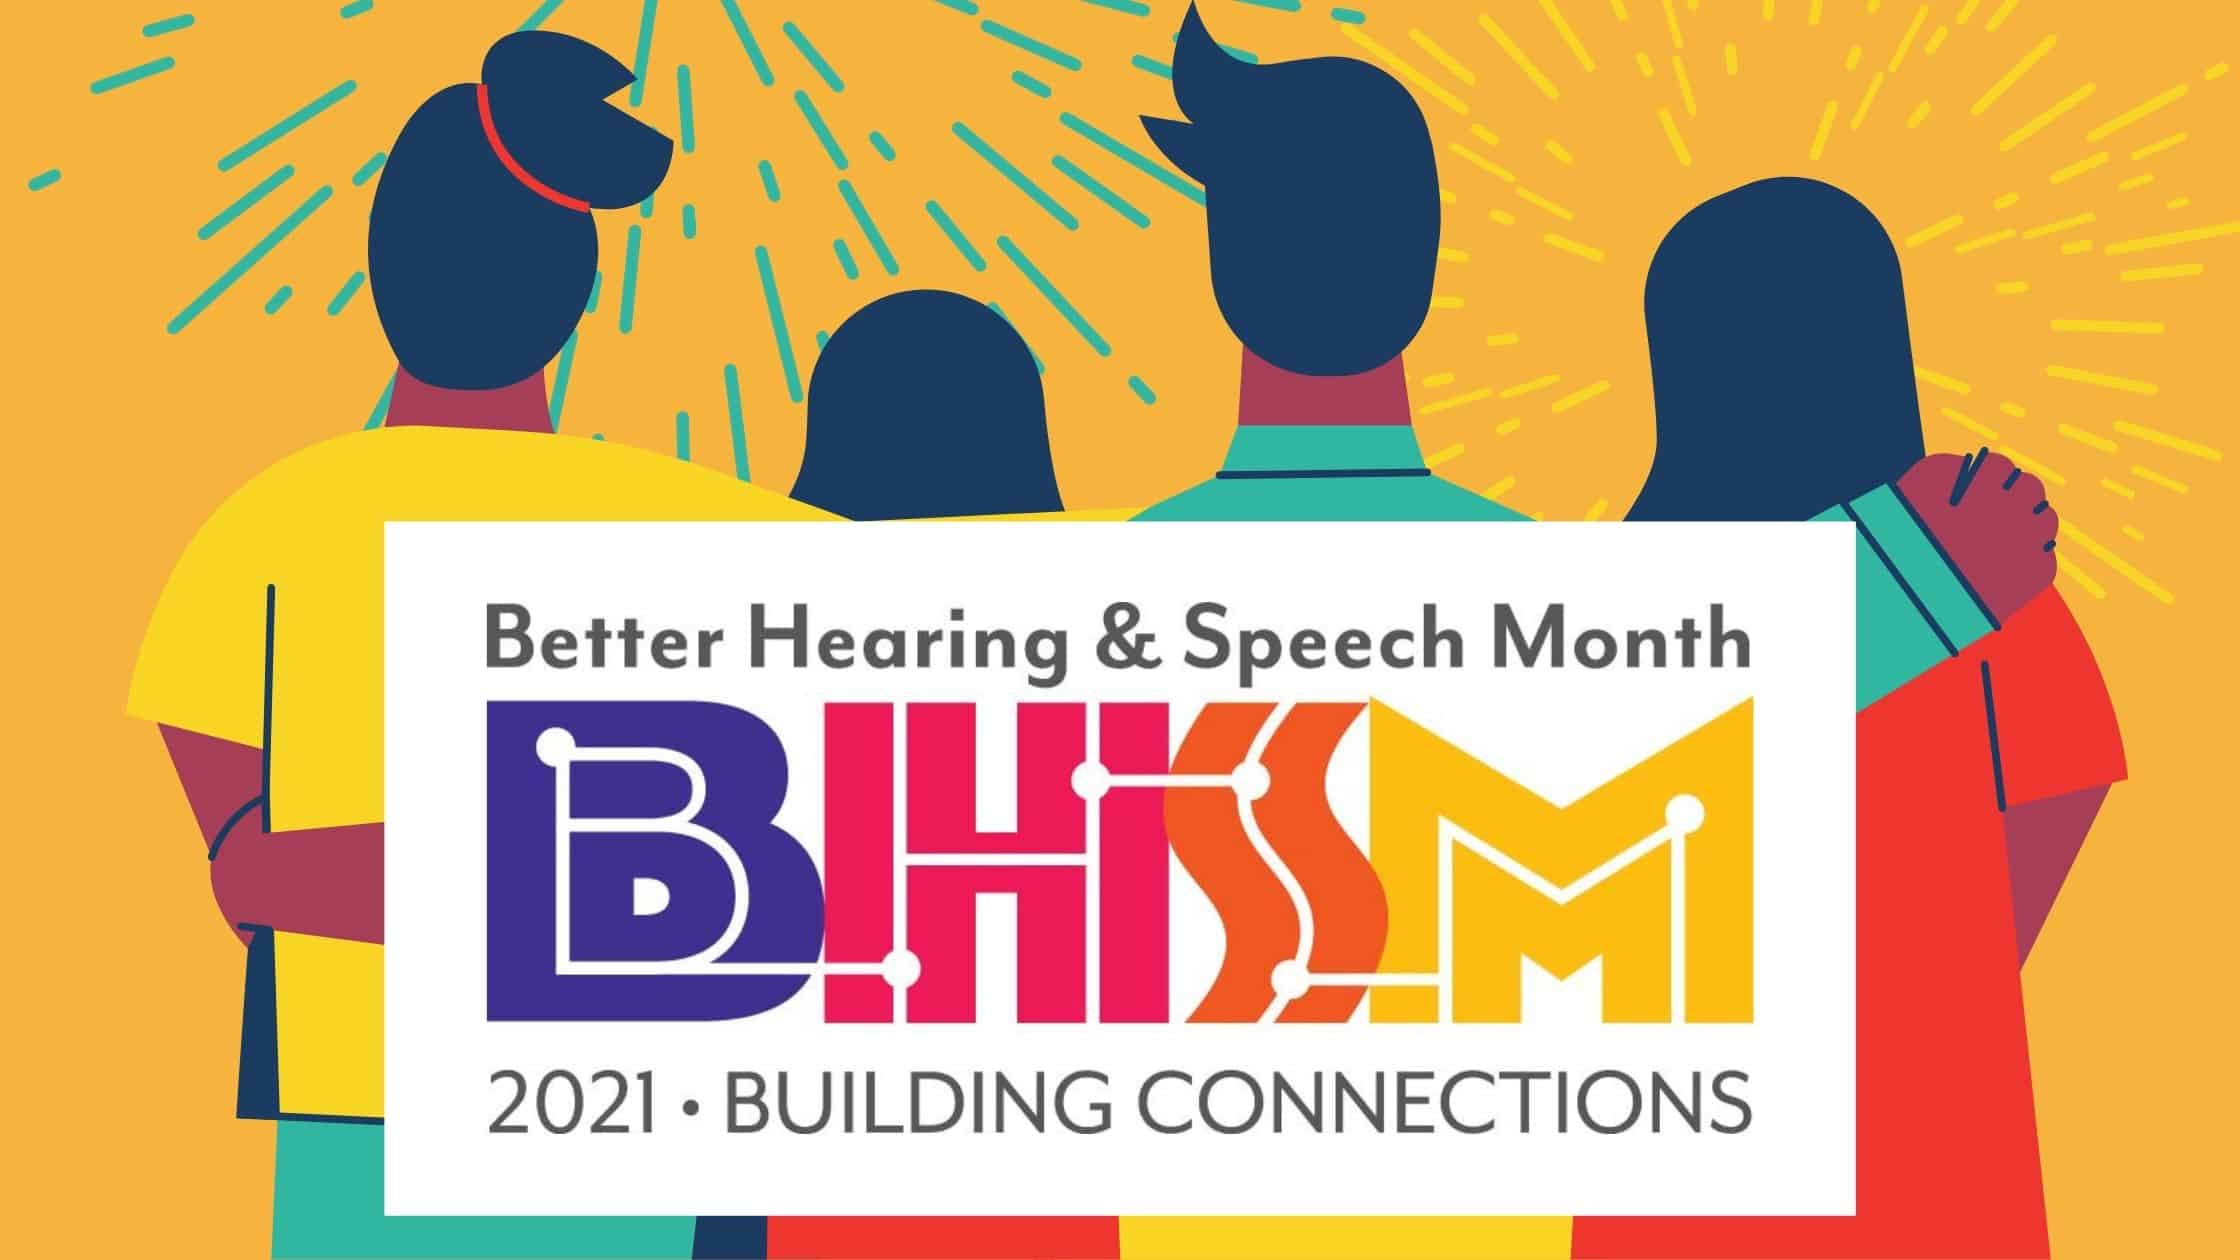 Featured image for “Building Connections | May is Better Hearing and Speech Month”